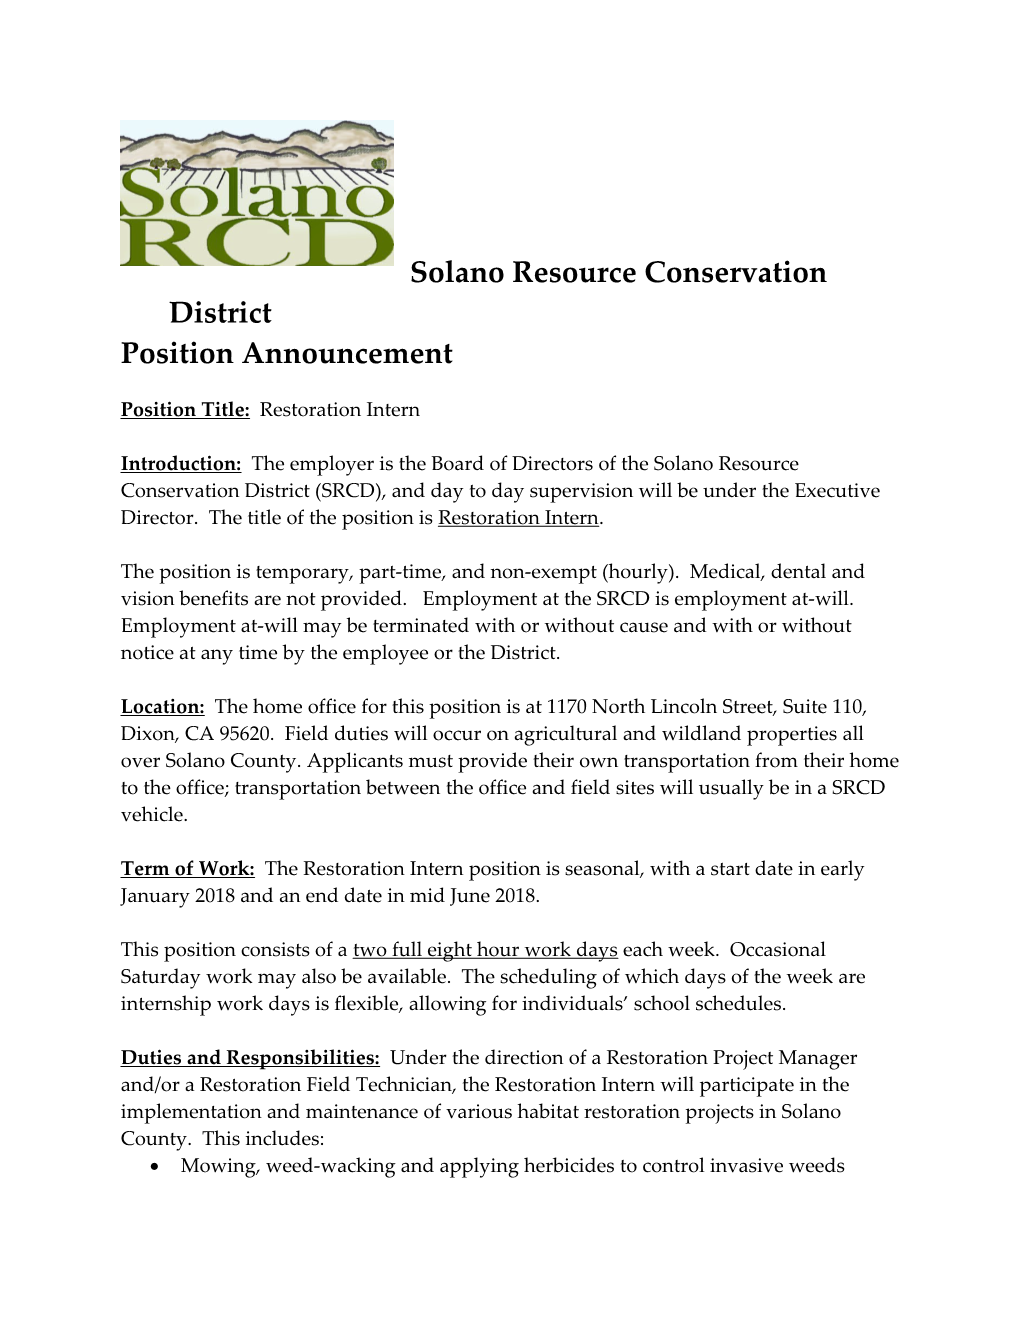 Solano Resource Conservation District